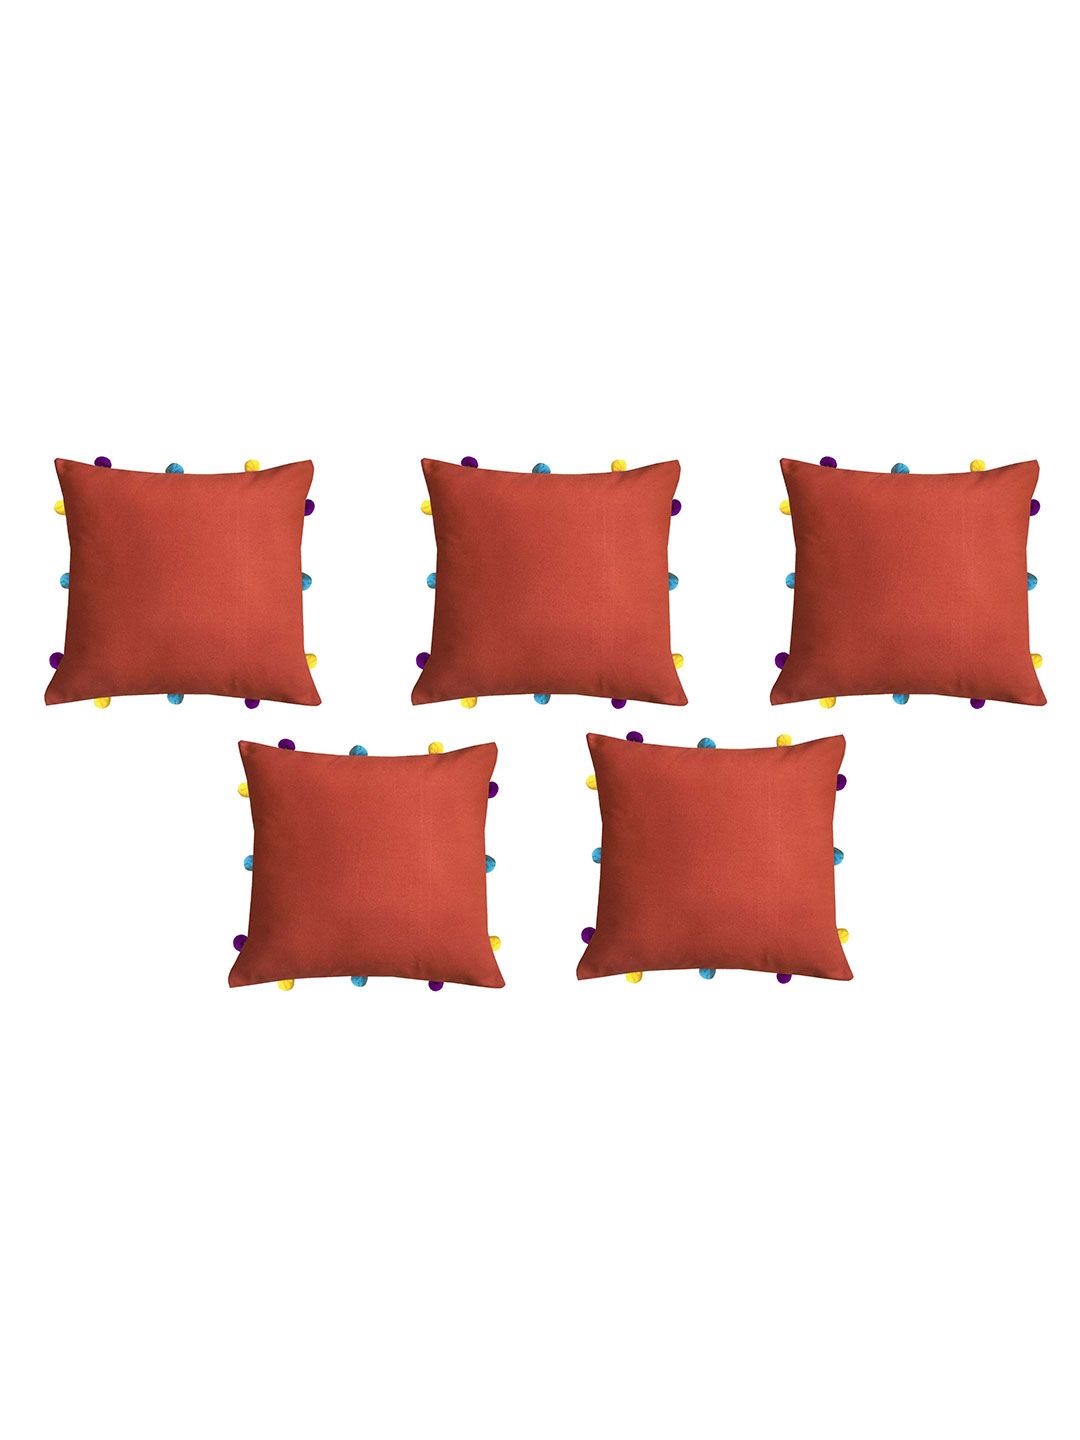 Lushomes Copper-Toned Set of 5 Square Cushion Covers of  30.48 x 30.48 cm Price in India